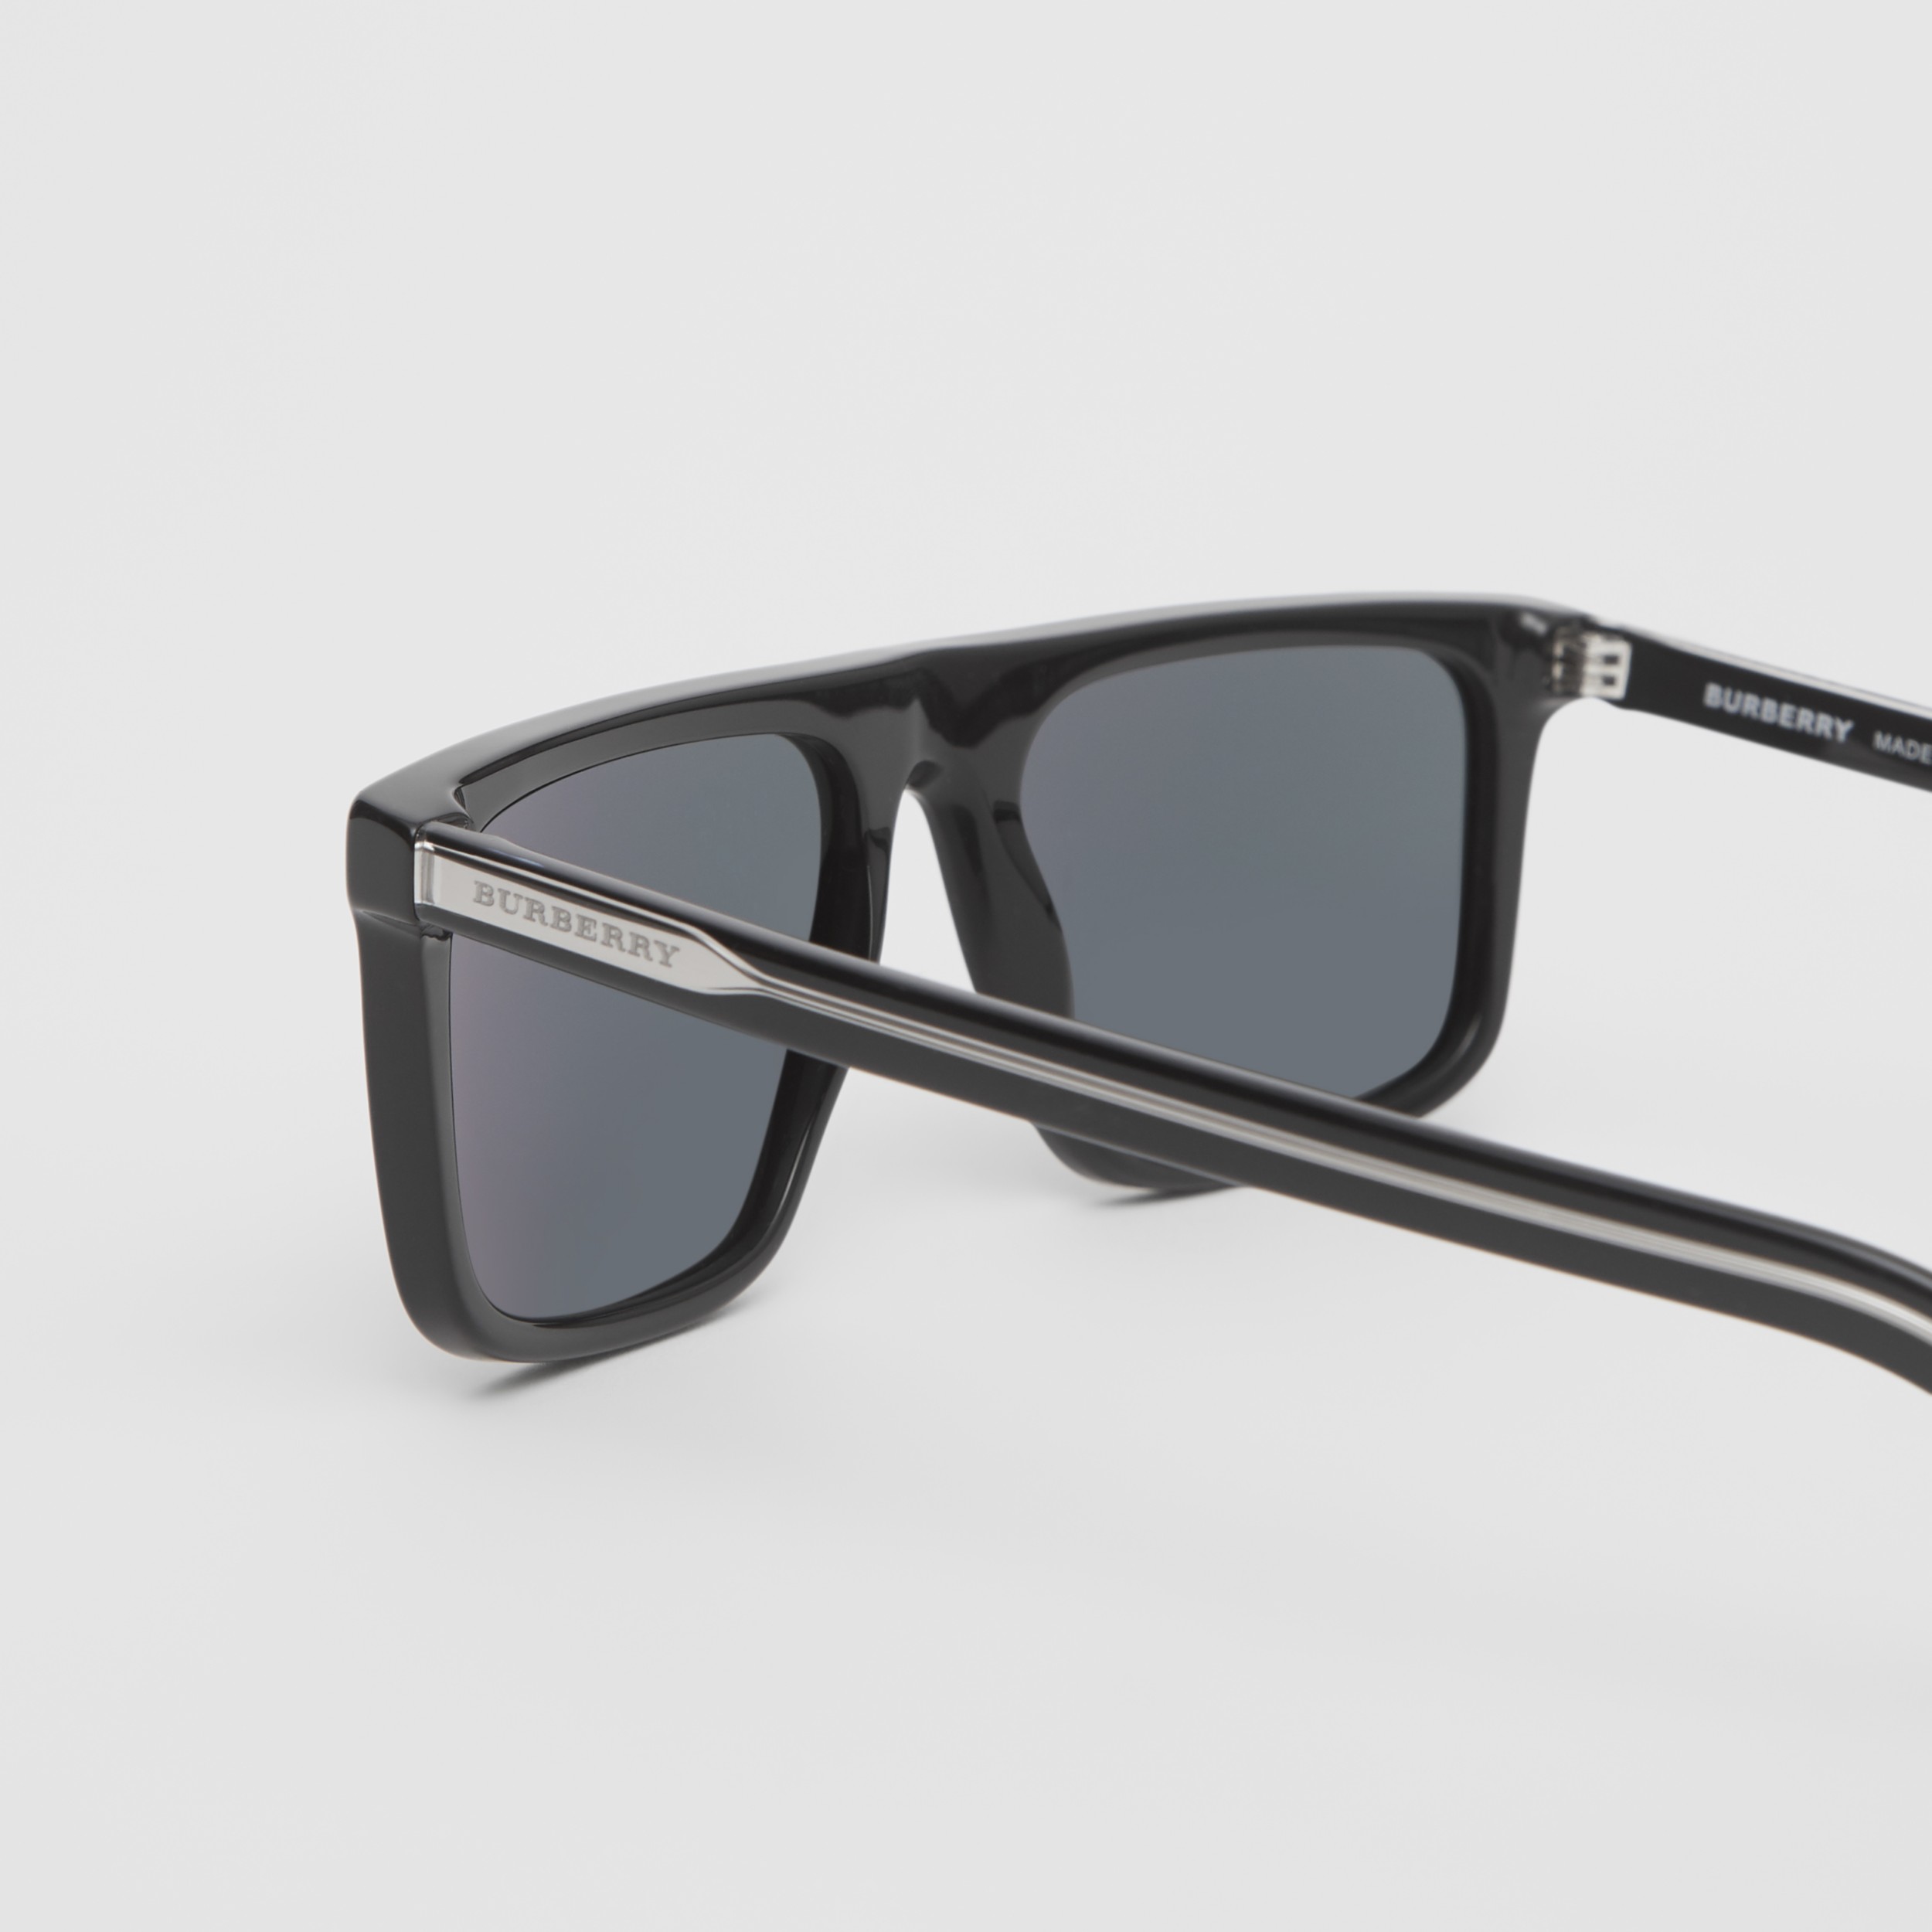 Vintage Check Detail Straight-brow Sunglasses in Black - Men | Burberry ...